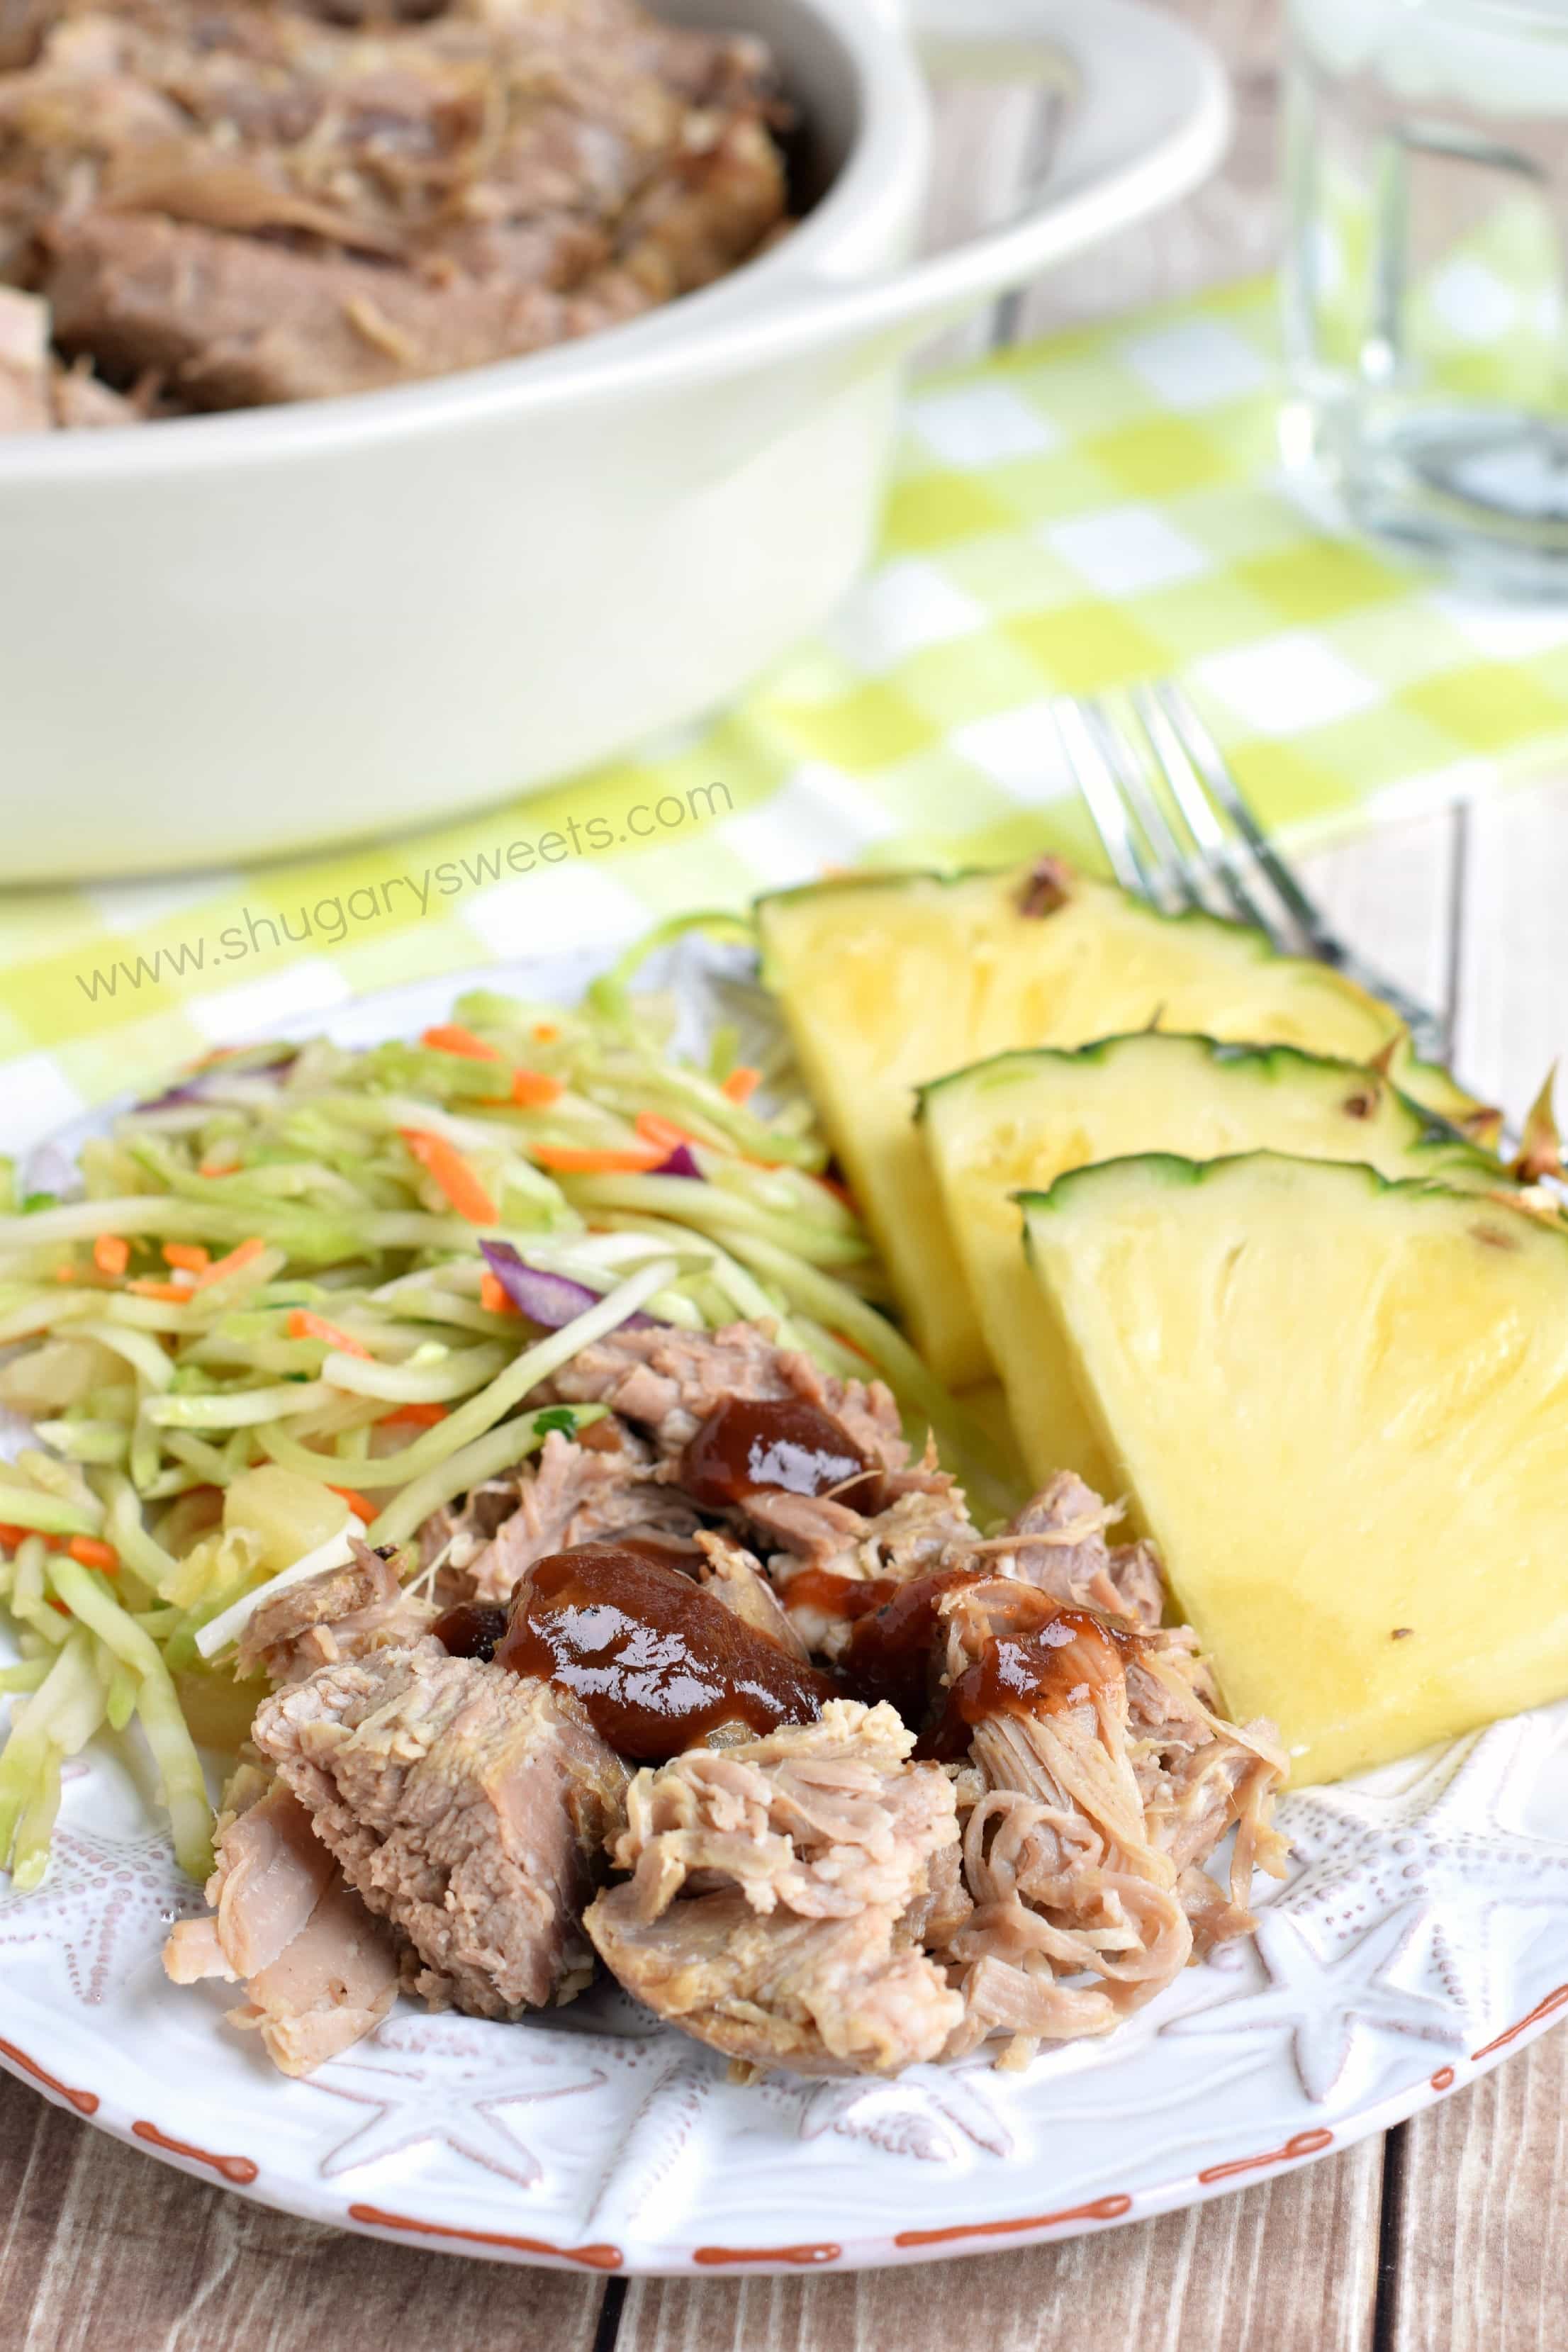 Kalua pork on a dinner plate with slaw and pineapple.